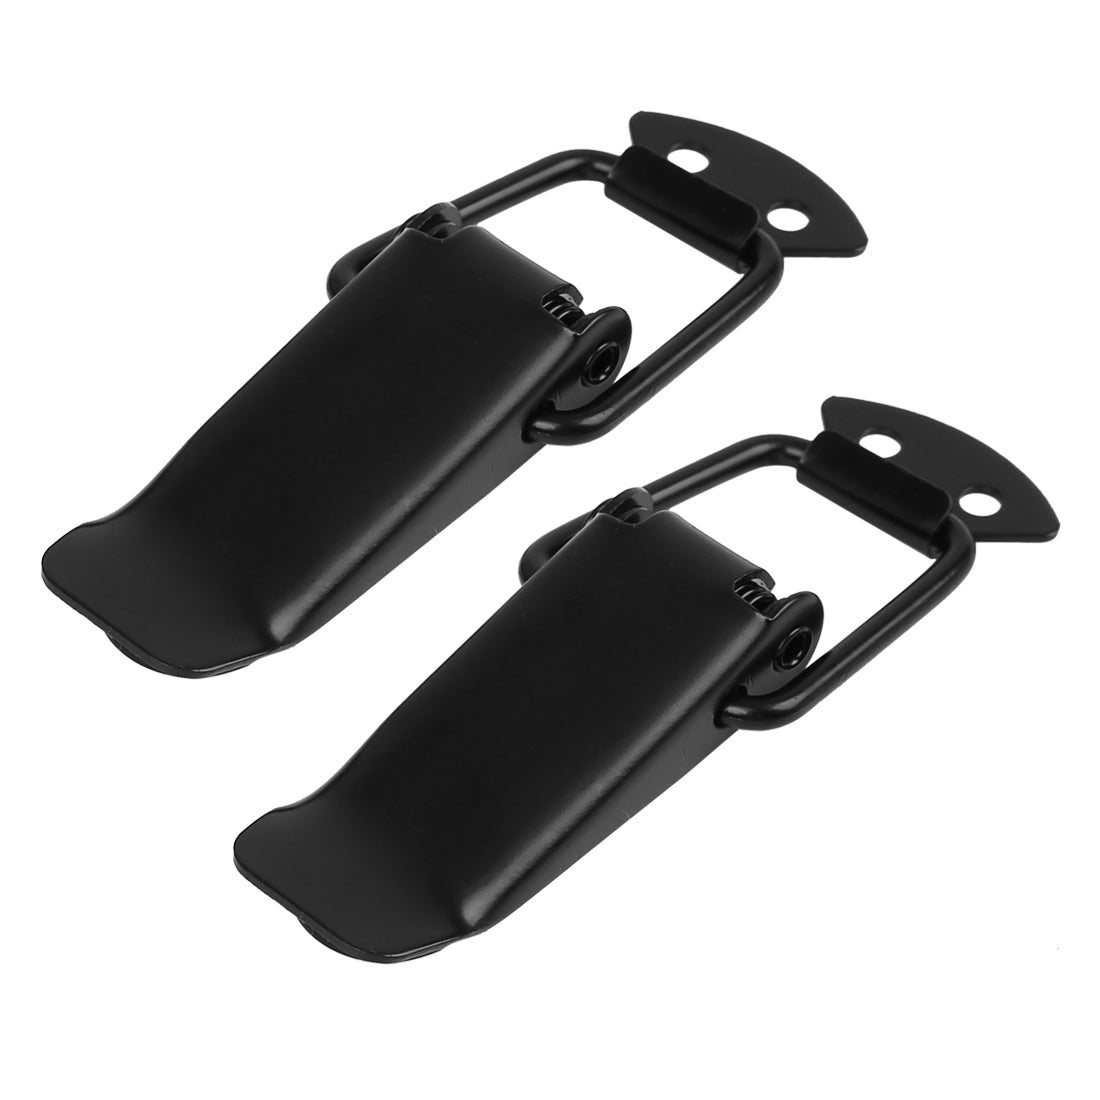 uxcell Uxcell Aviation Case Toolbox 3.5" Metal Pull Down Draw Latch Black 2pcs